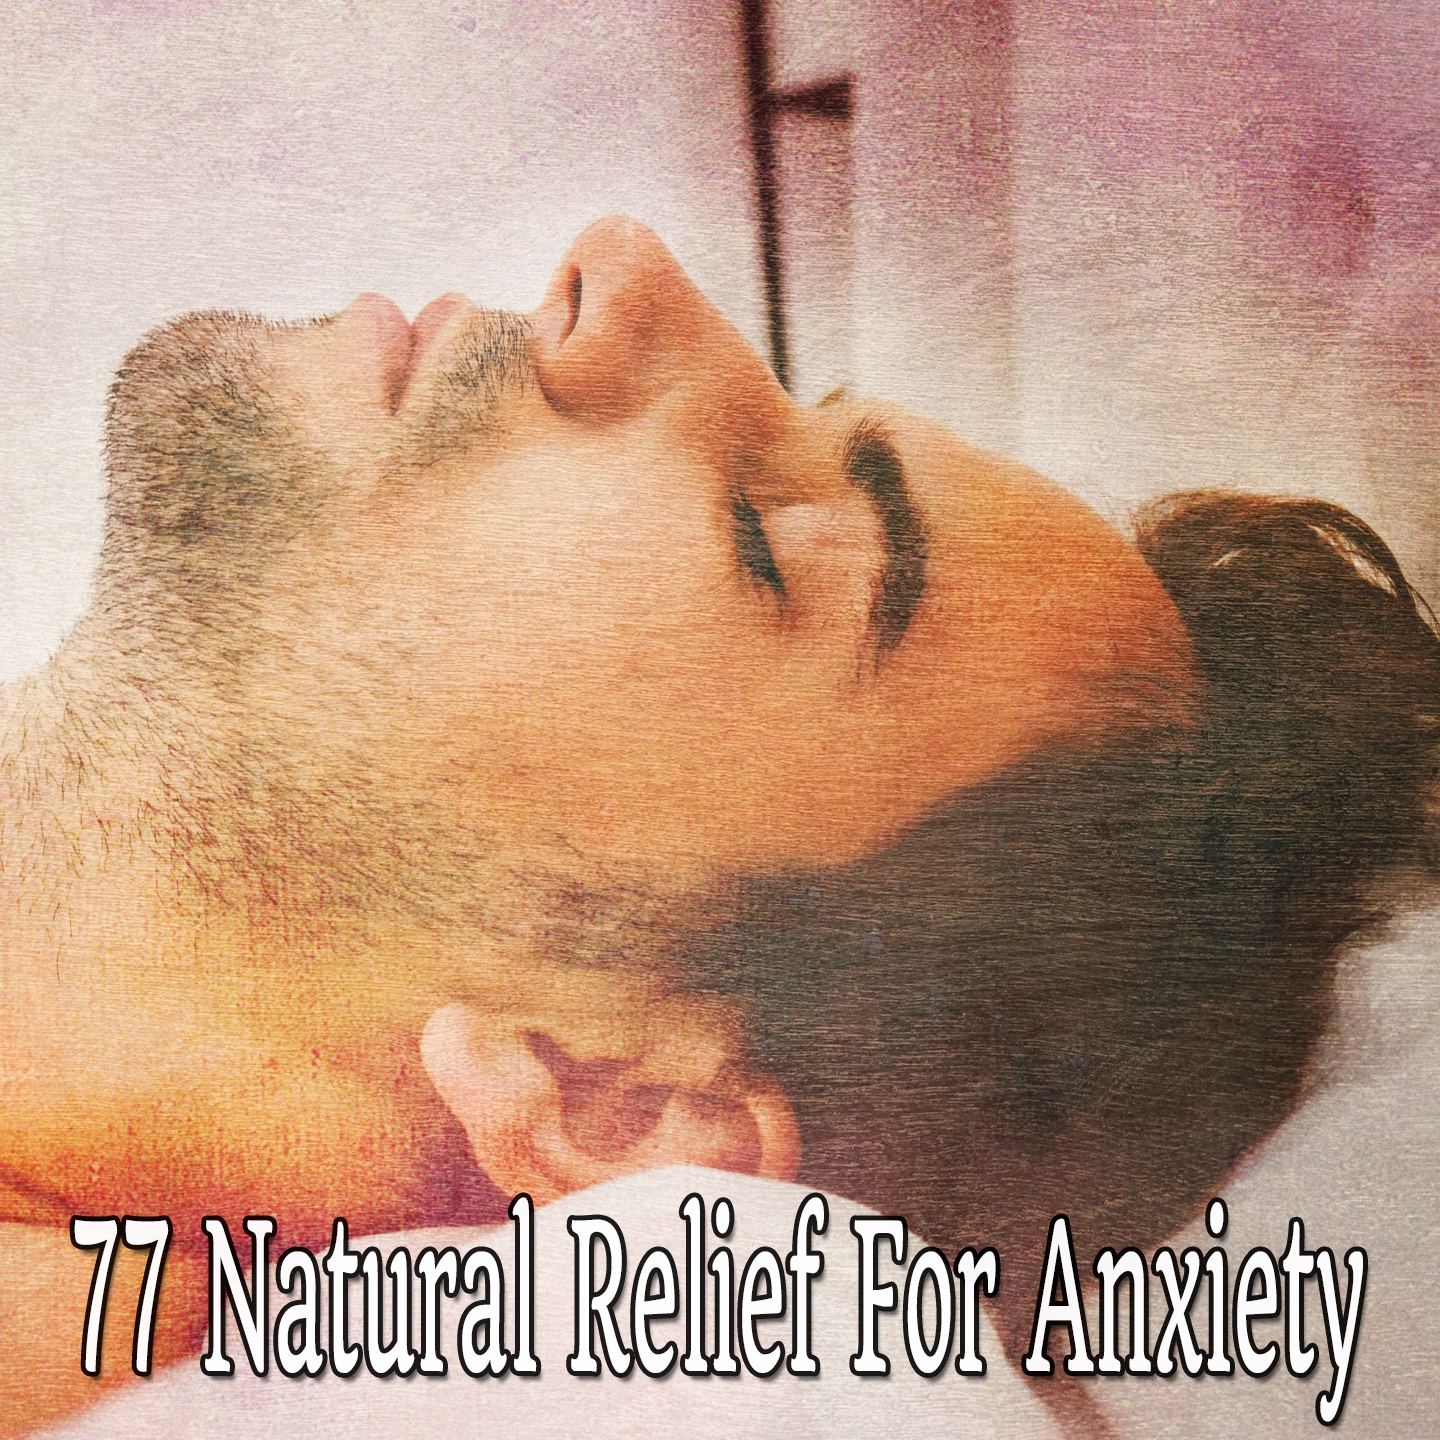 77 Natural Relief For Anxiety